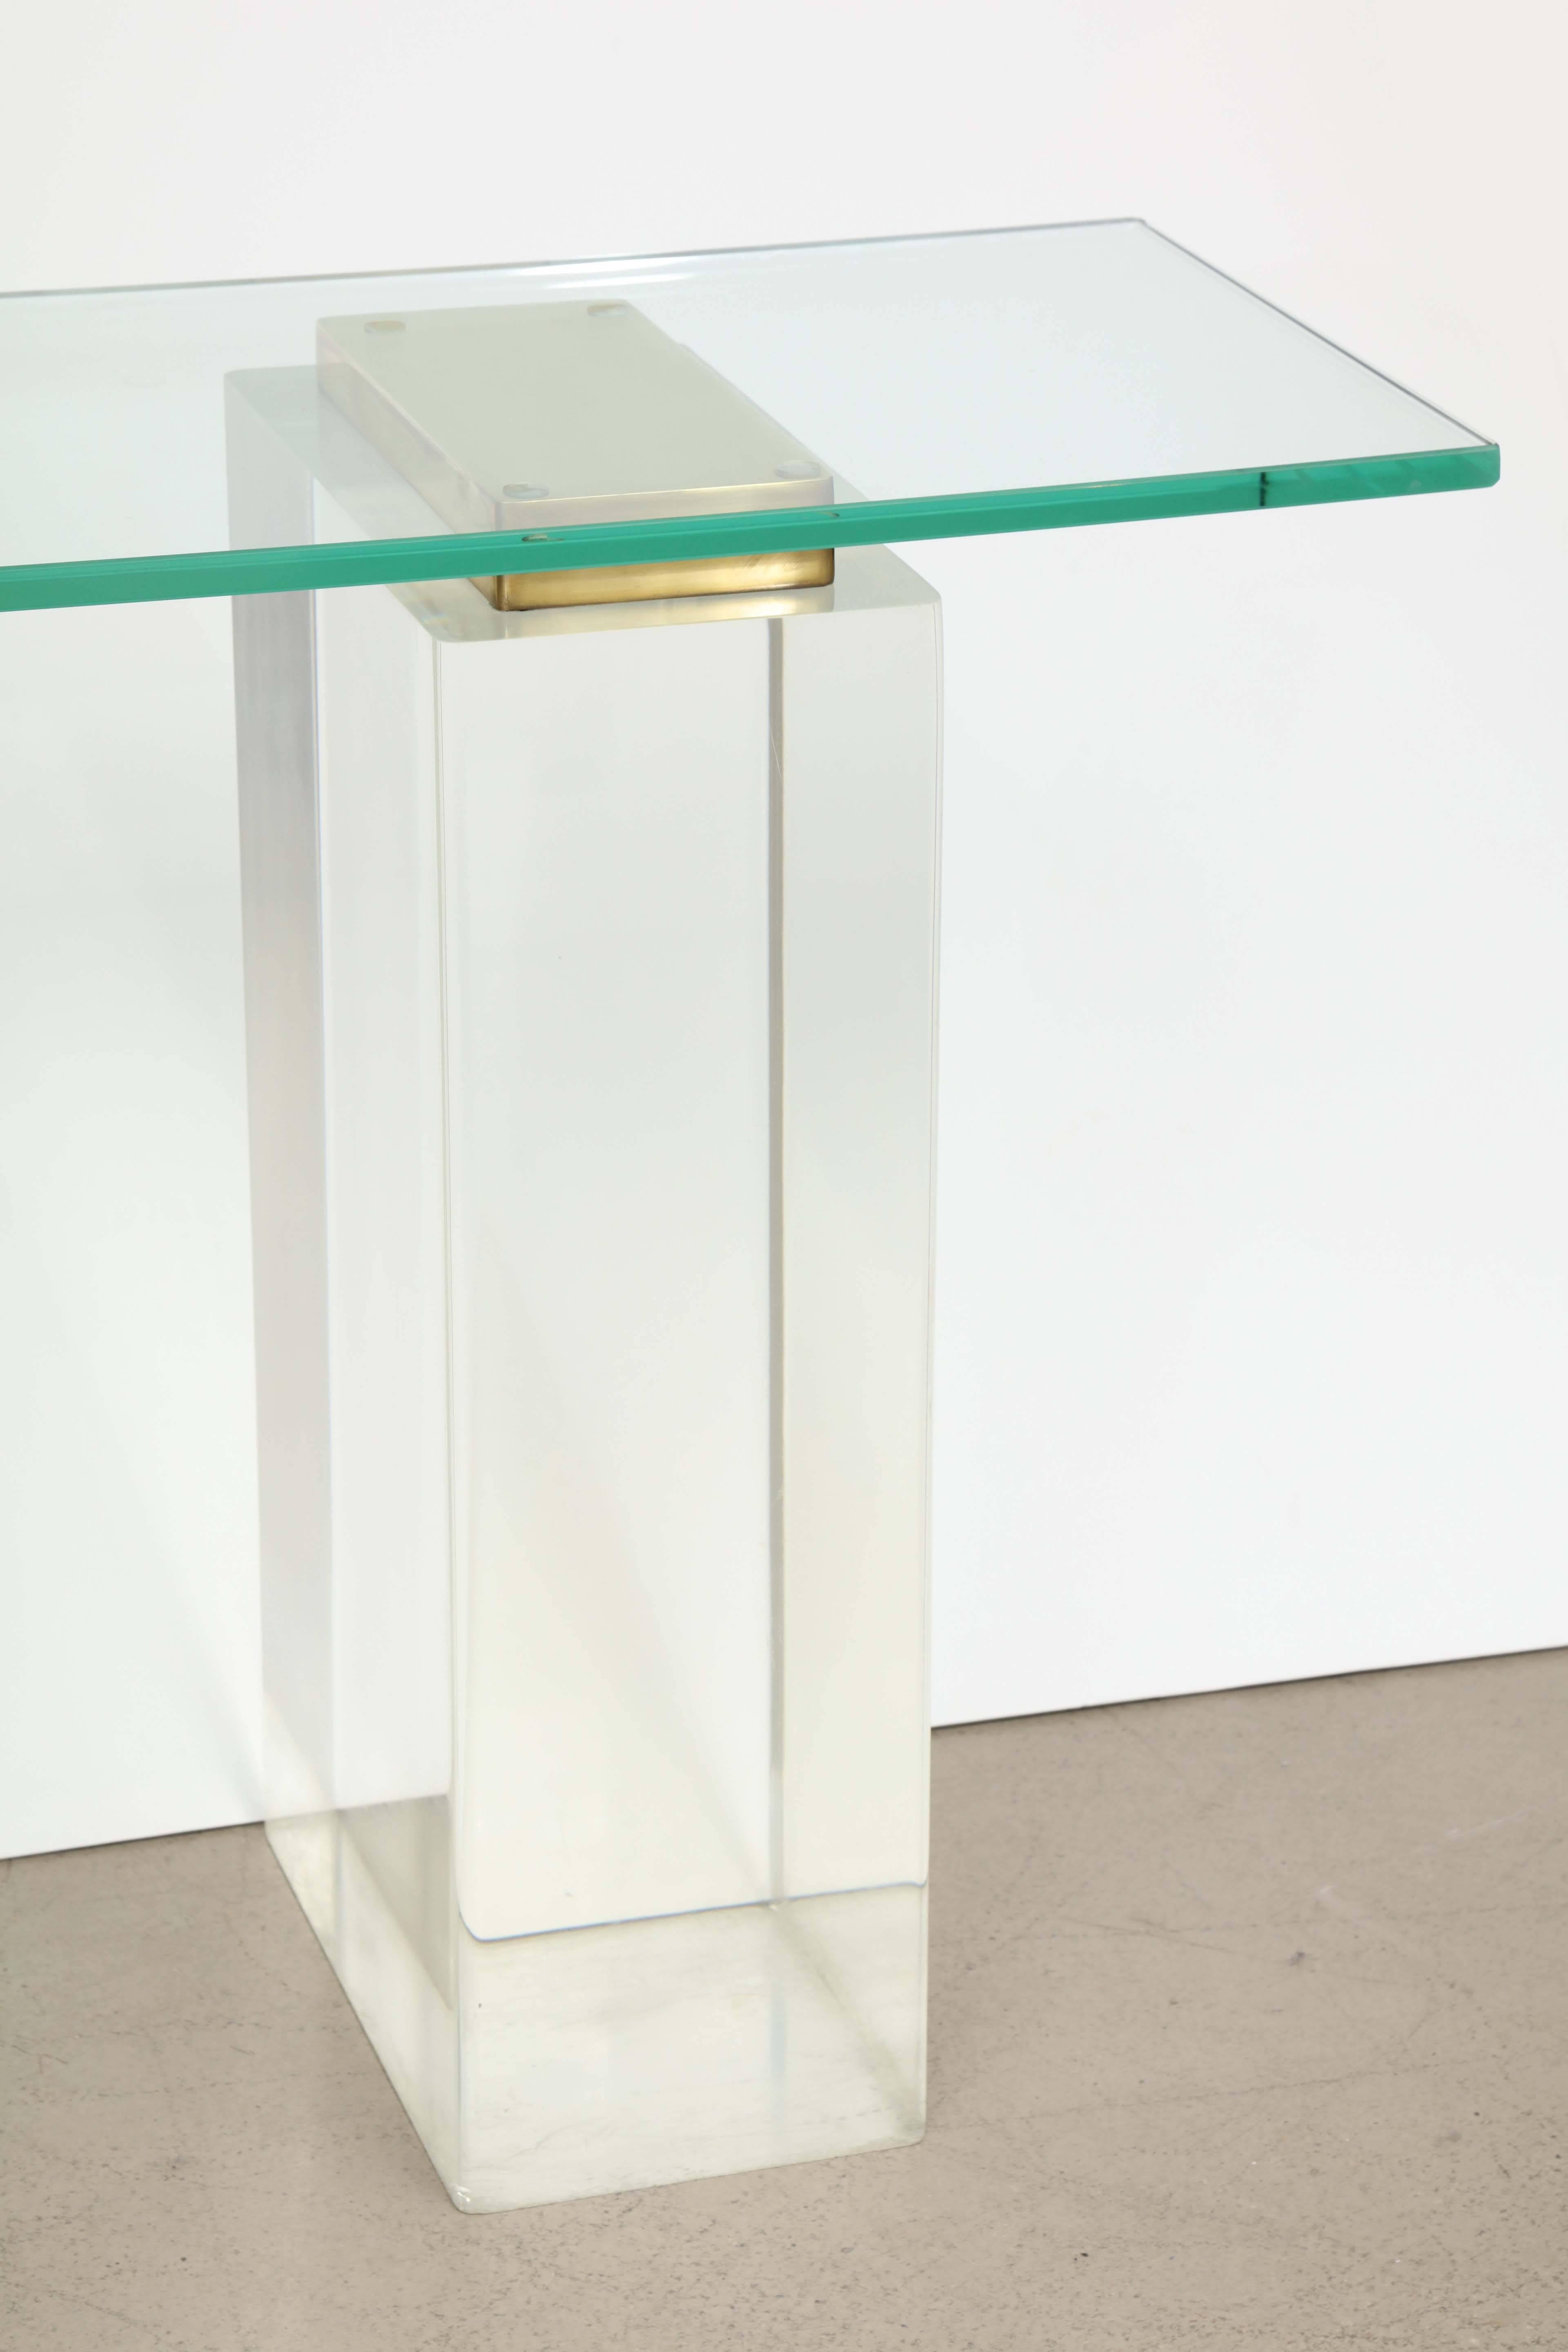 Glass Lucite Console Table with Massive Solid Lucite Columns